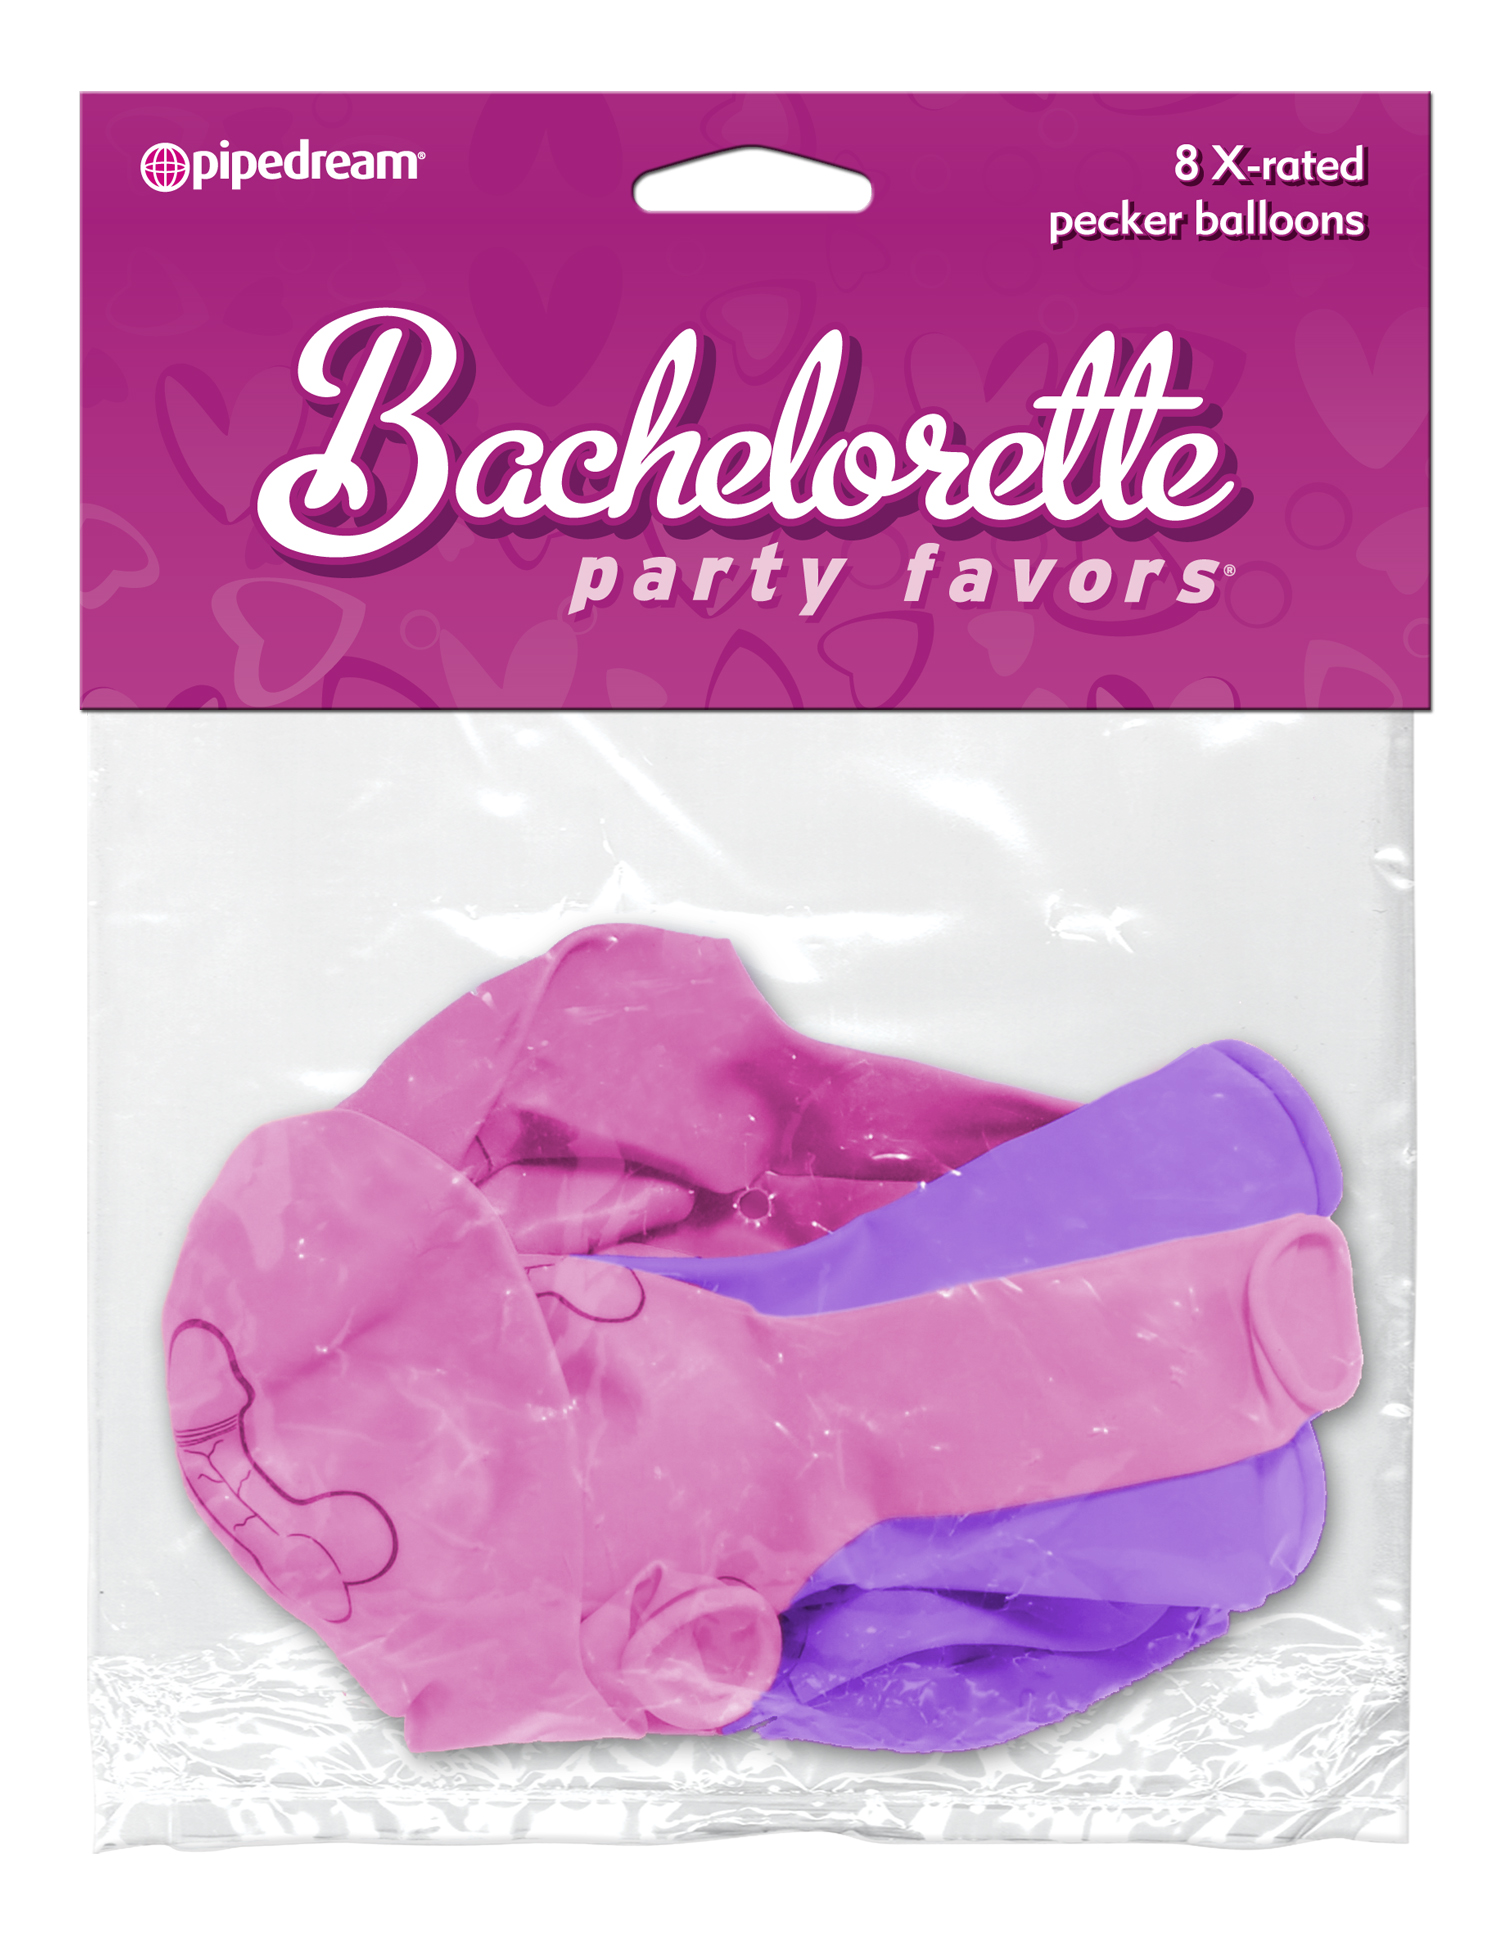 Bachelorette Party Favors - X-Rated Pecker Balloons - Pink and Purple